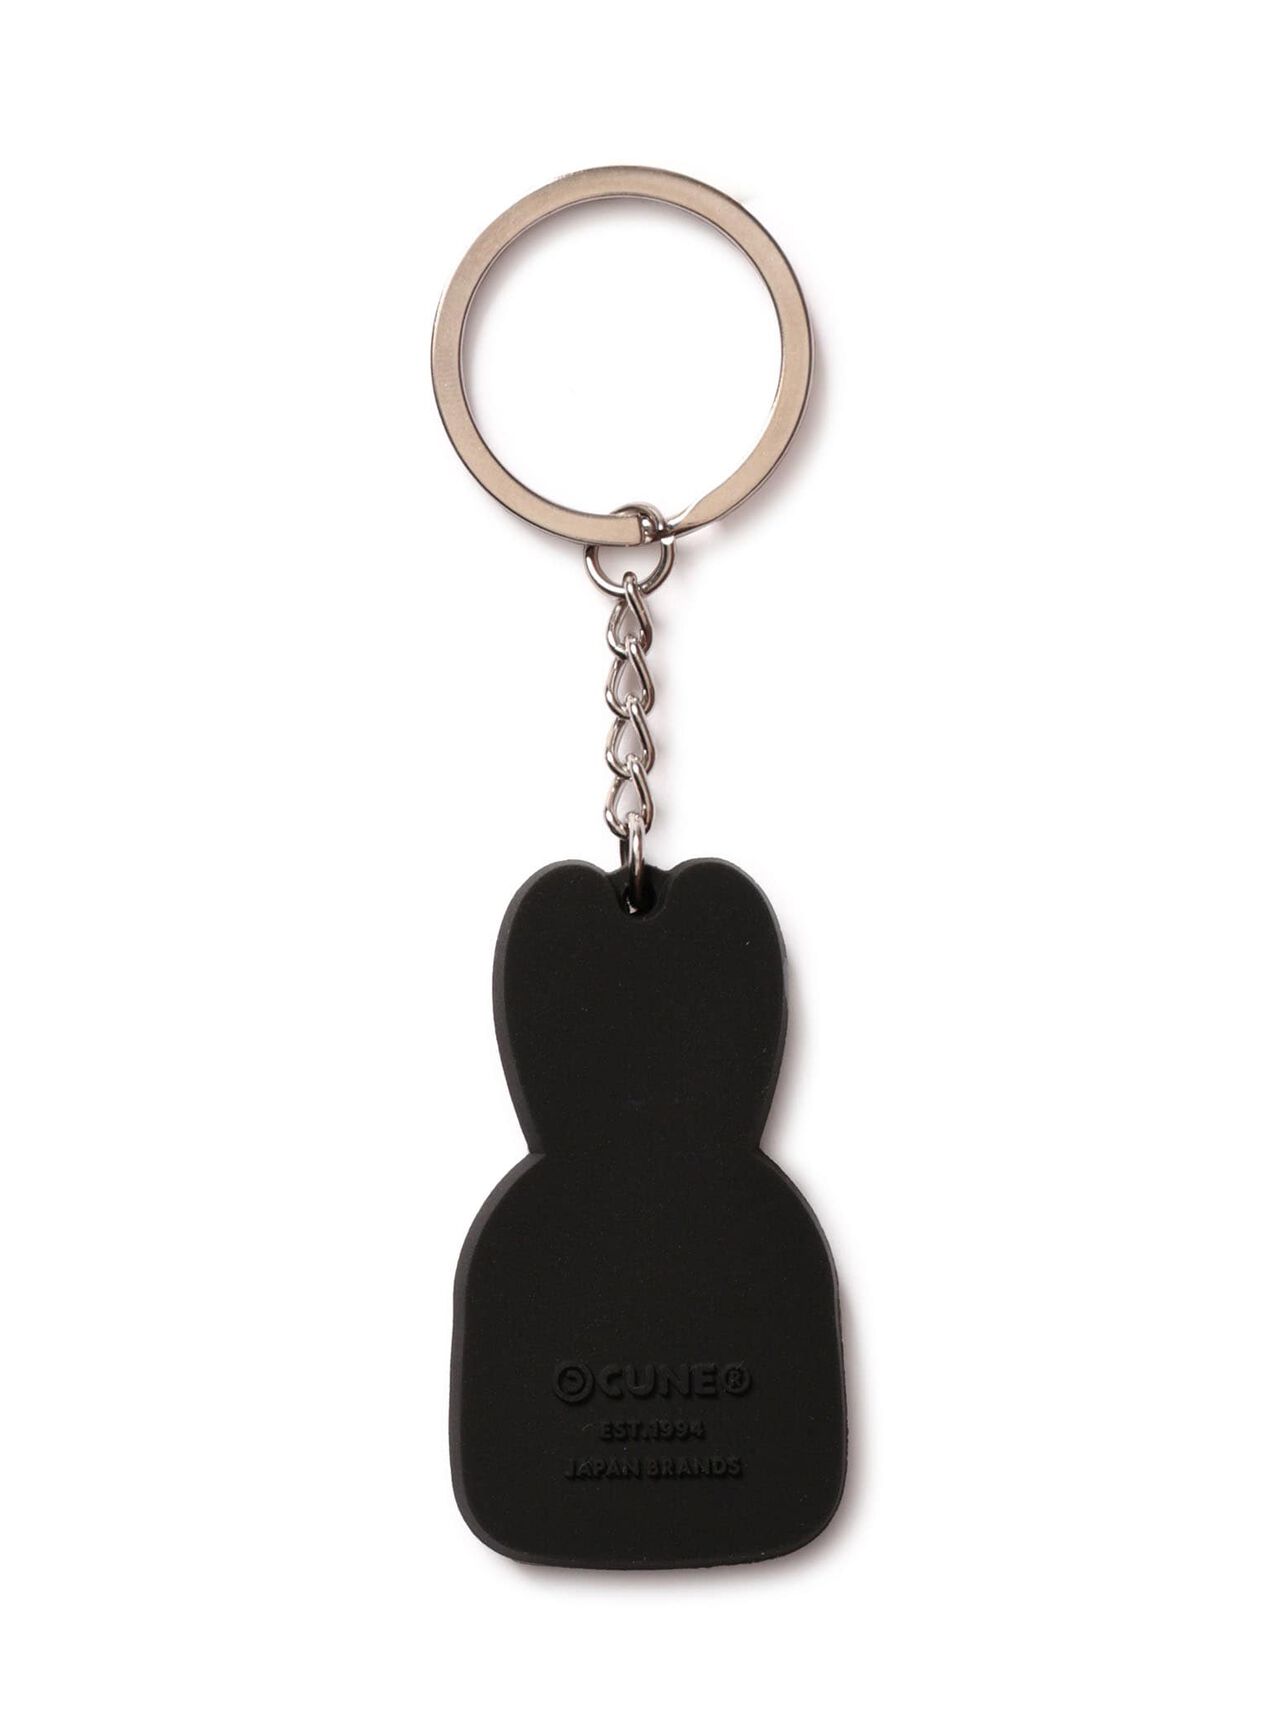 Rubber Key Chain CUNE Rabbit,ONE, large image number 1